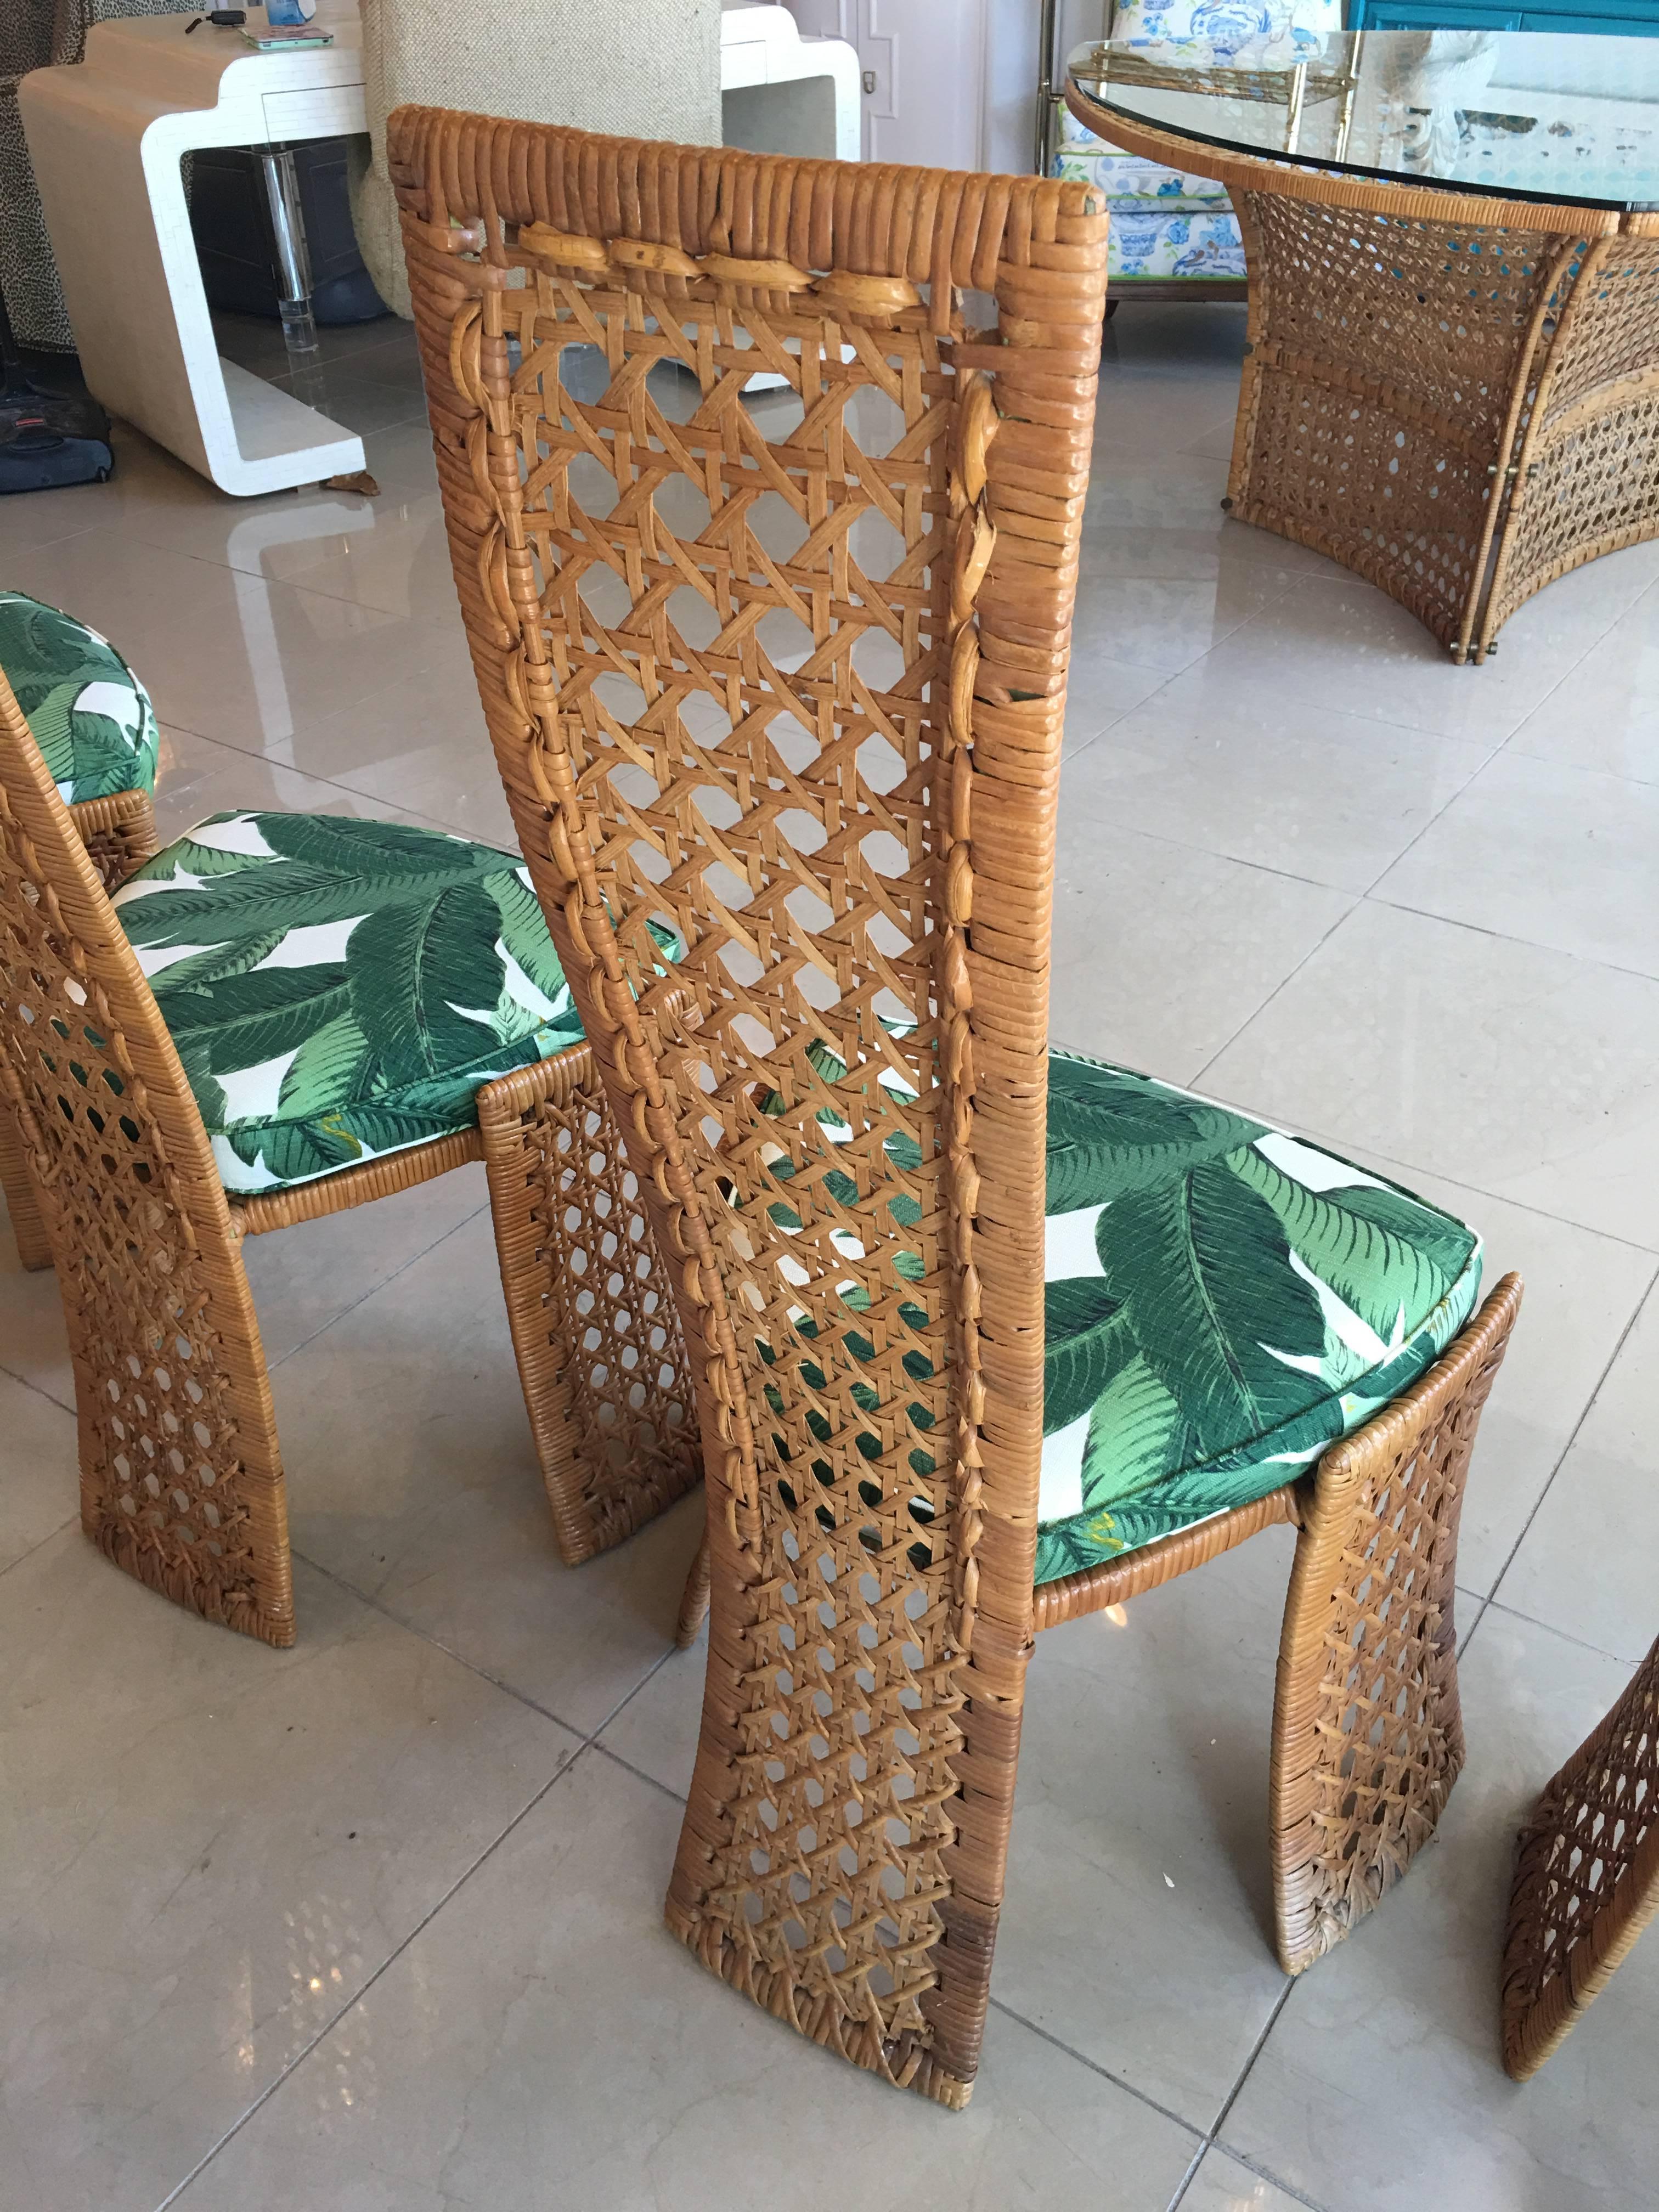 Hollywood Regency Danny Ho Fong Dining Table Set Four Side Chairs Rattan Wicker Tropical Bamboo